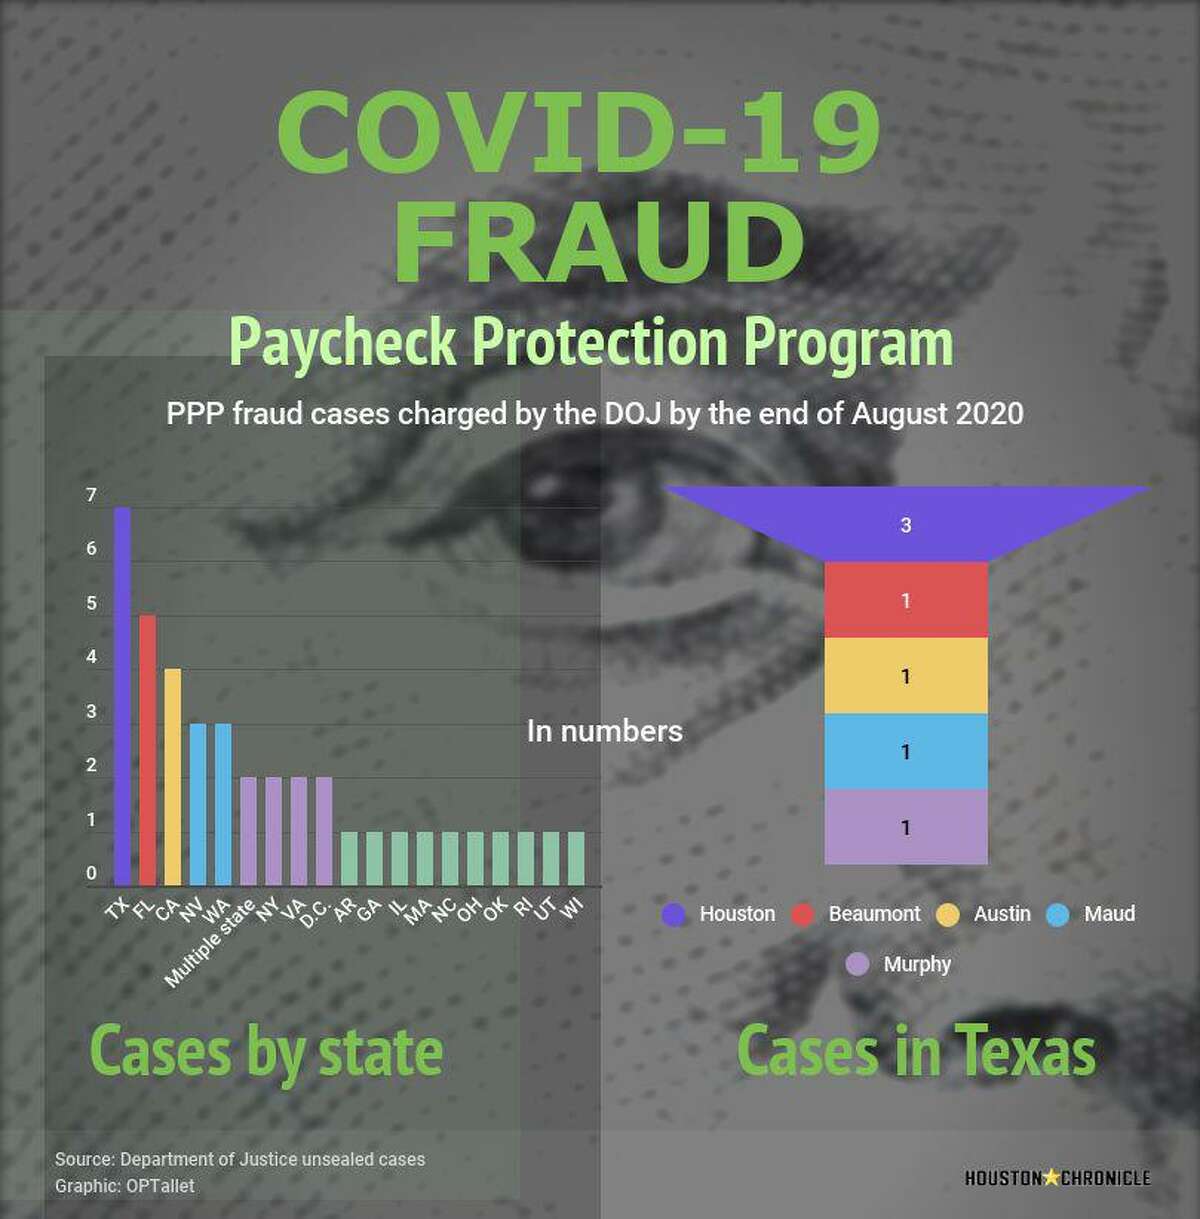 Graphic: Number of Paycheck Protection Program’s loan frauds charged by the DOJ by the end of August 2020, by state. The PPP was created by the CARES Act to help small businesses struggling to pay employees during the COVID-19 pandemic.